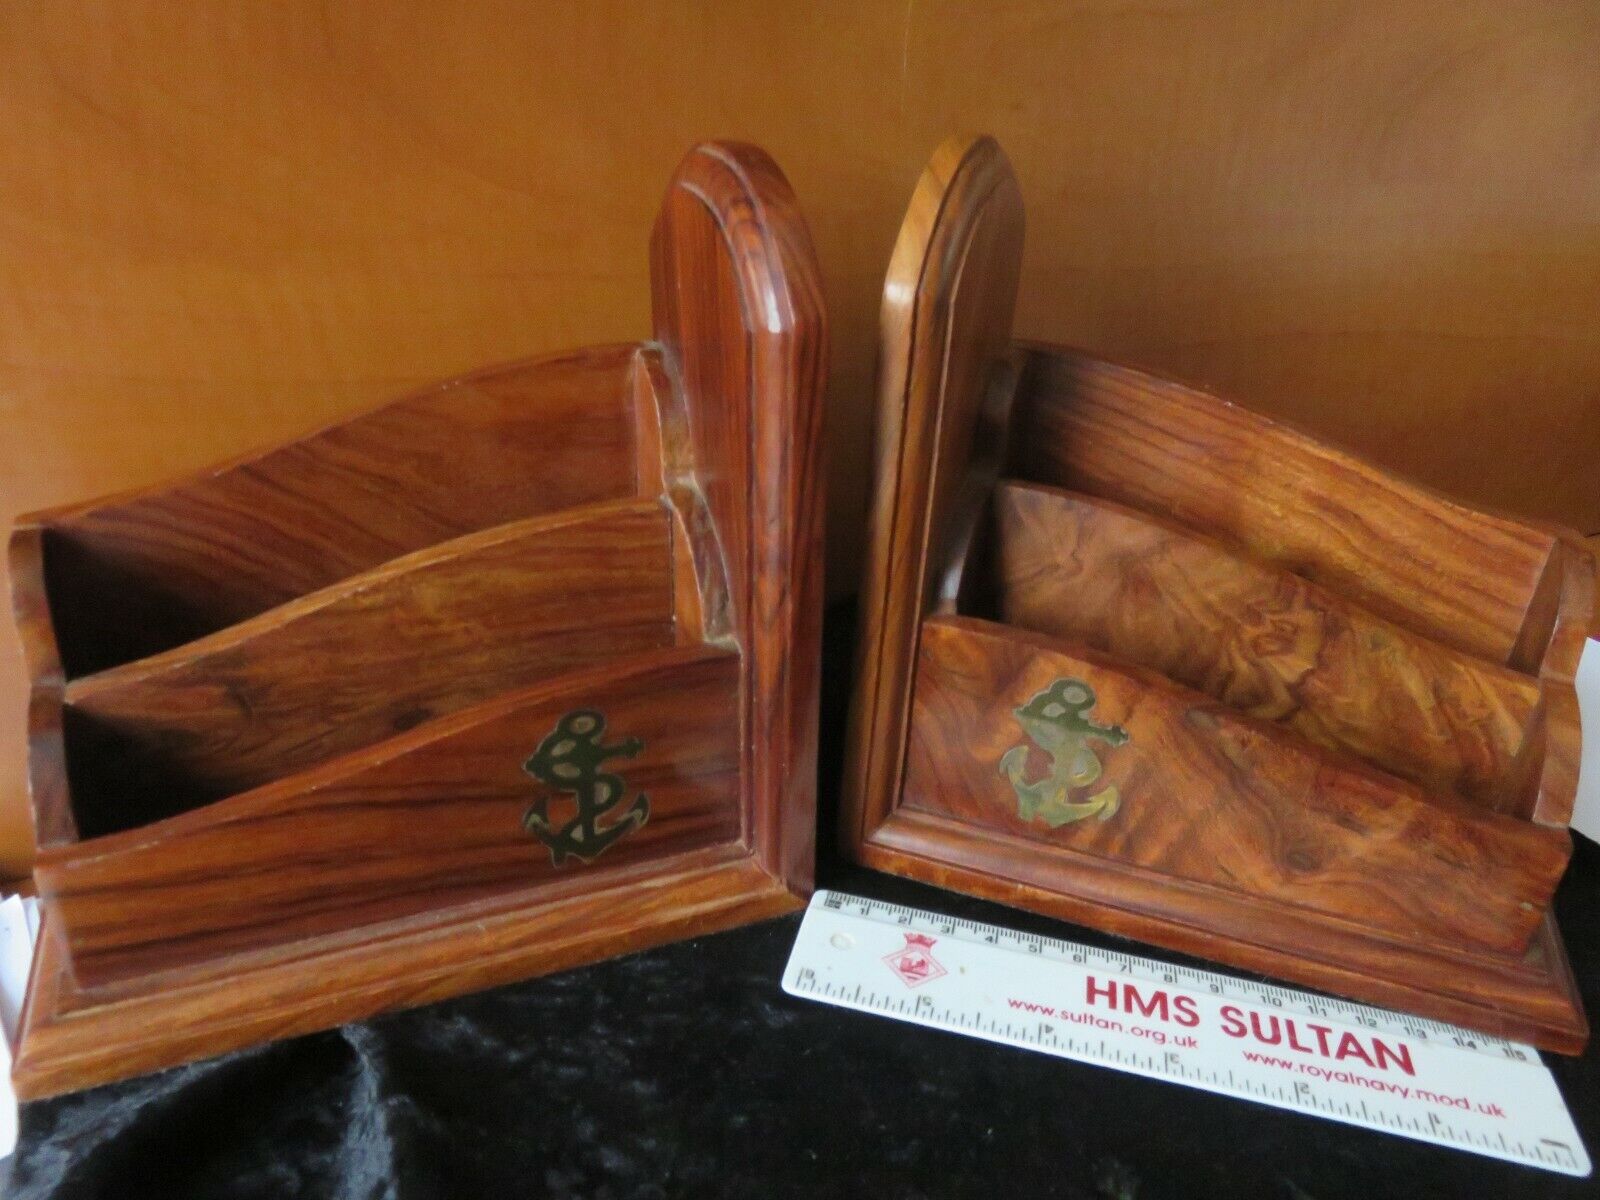 ROYAL NAVY - BOOKENDS WITH INLAID BRASS ANCHORS - NEAT